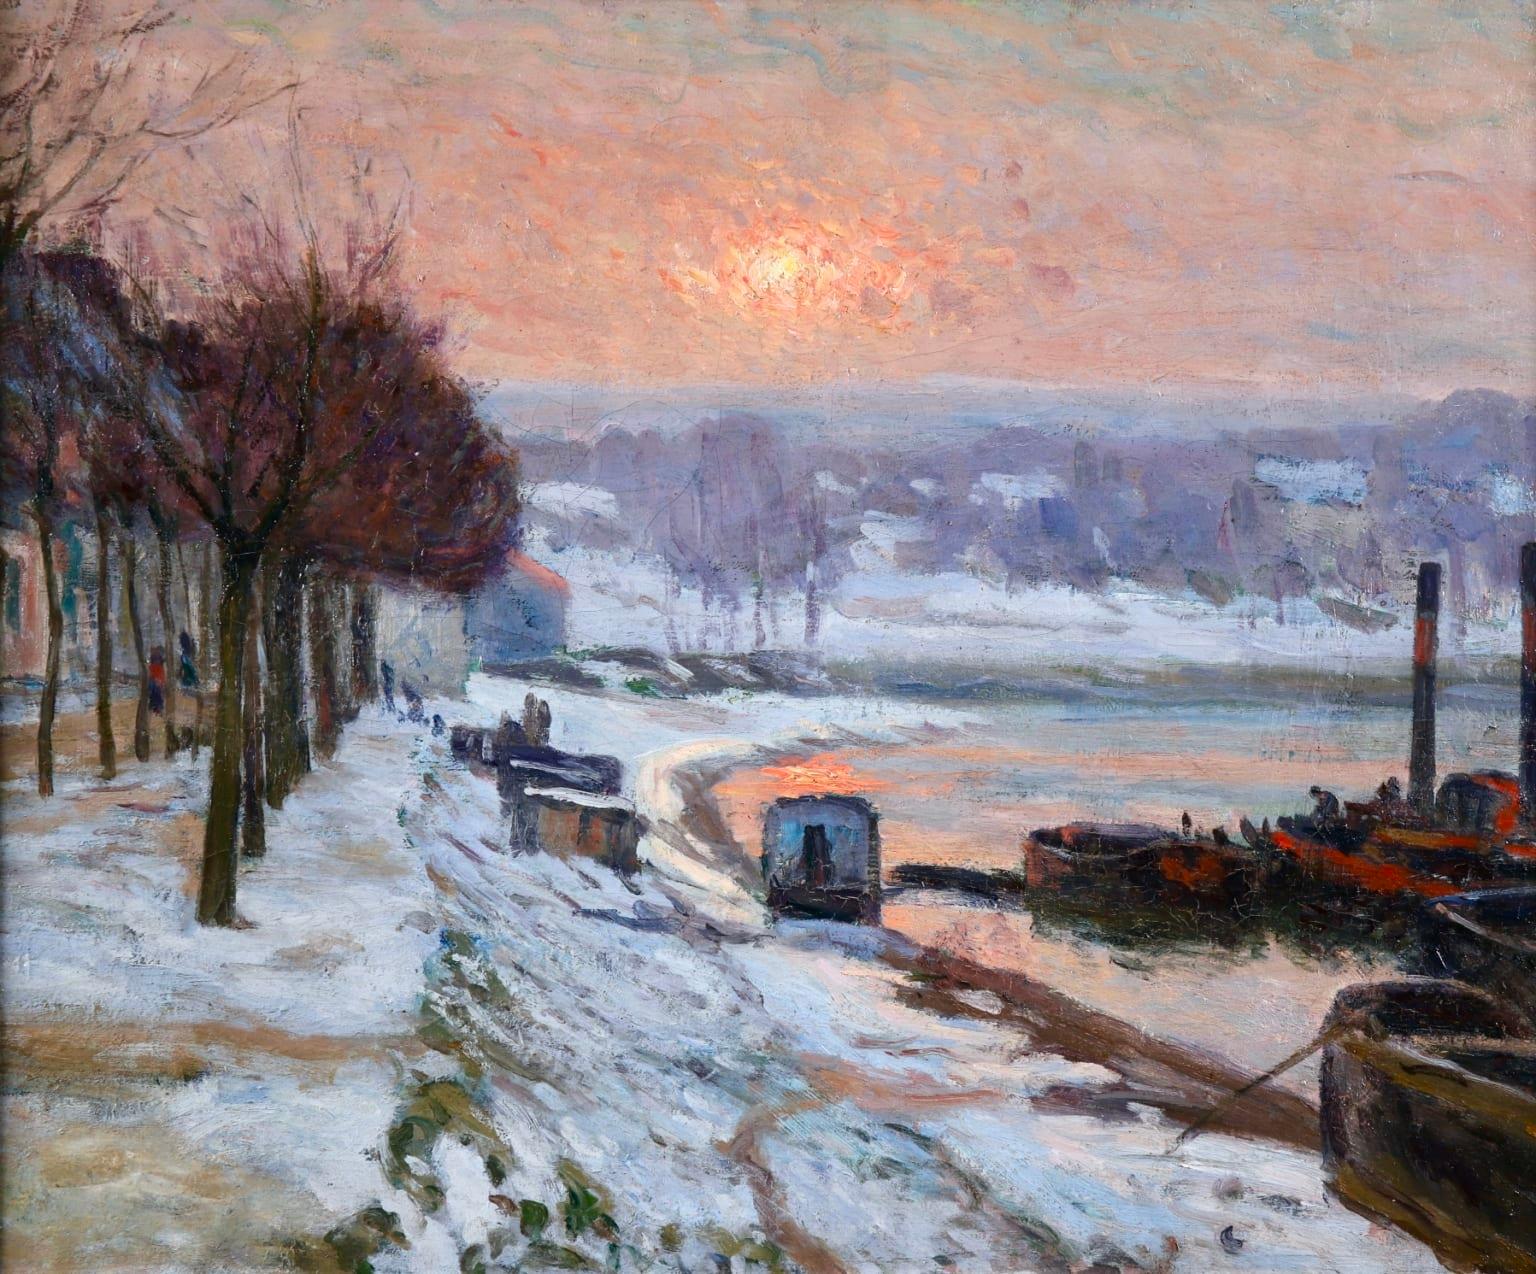 Snow on the Seine - Impressionist Winter River Landscape by Armand Guillaumin - Painting by Jean Baptiste-Armand Guillaumin